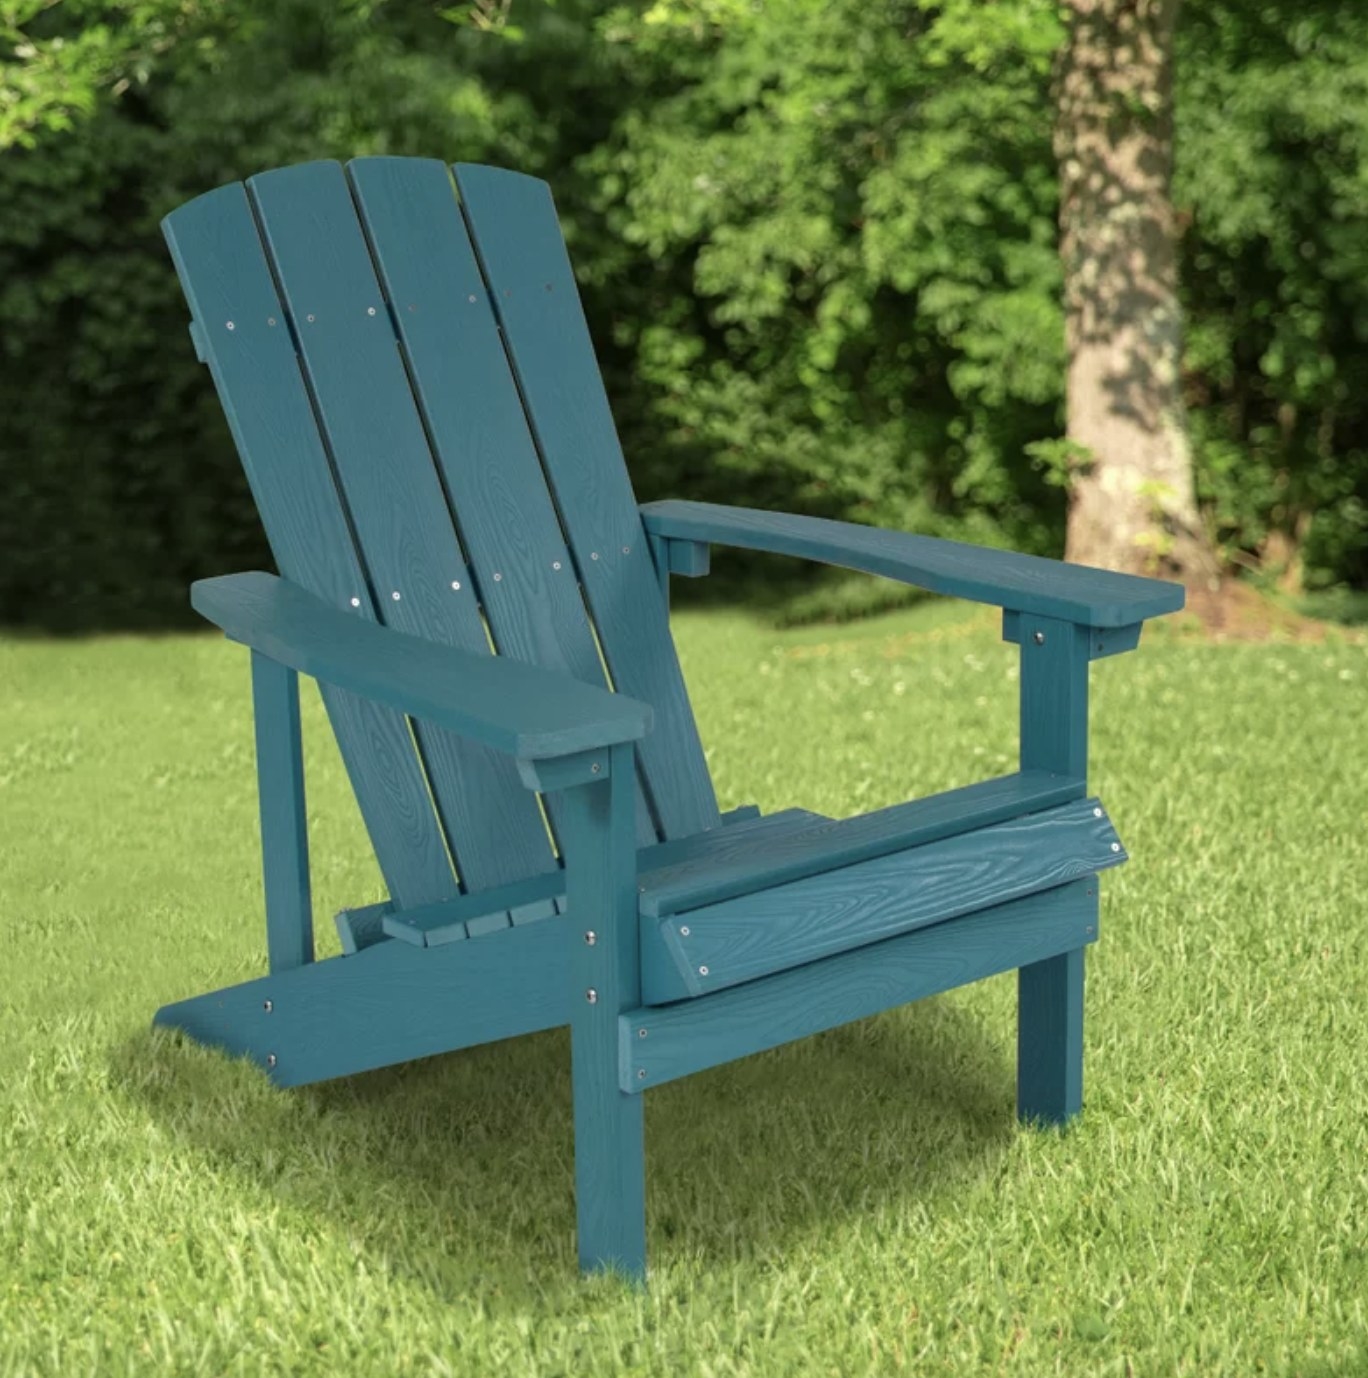 The blue wood-like chair is outside in a grassy area